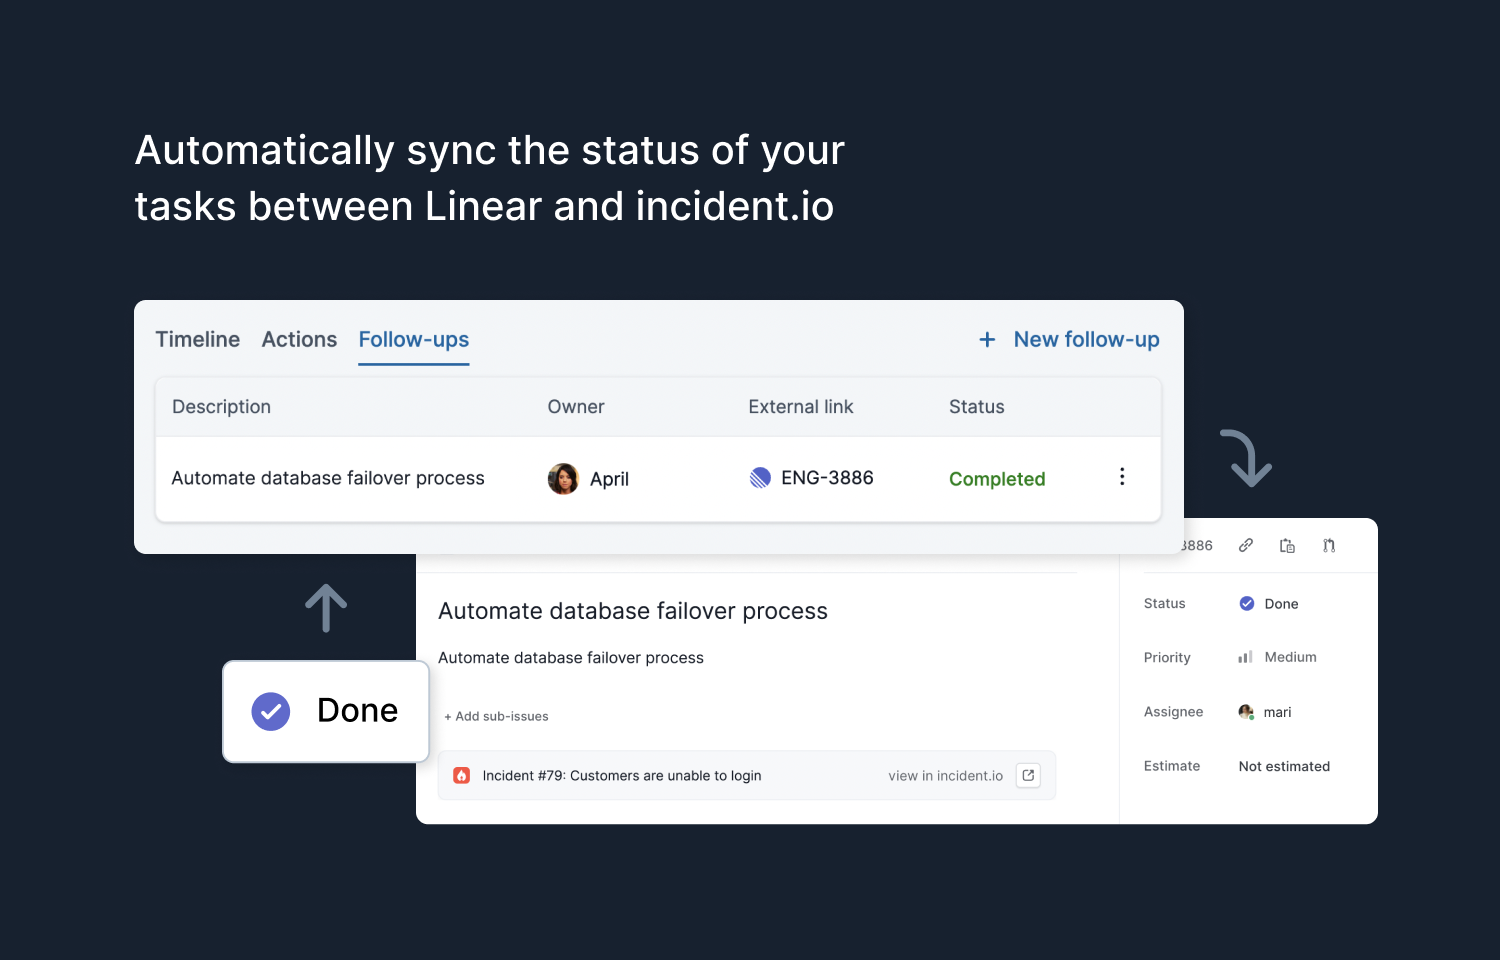 Automatically sync the status of your tasks between Linear and incident.io